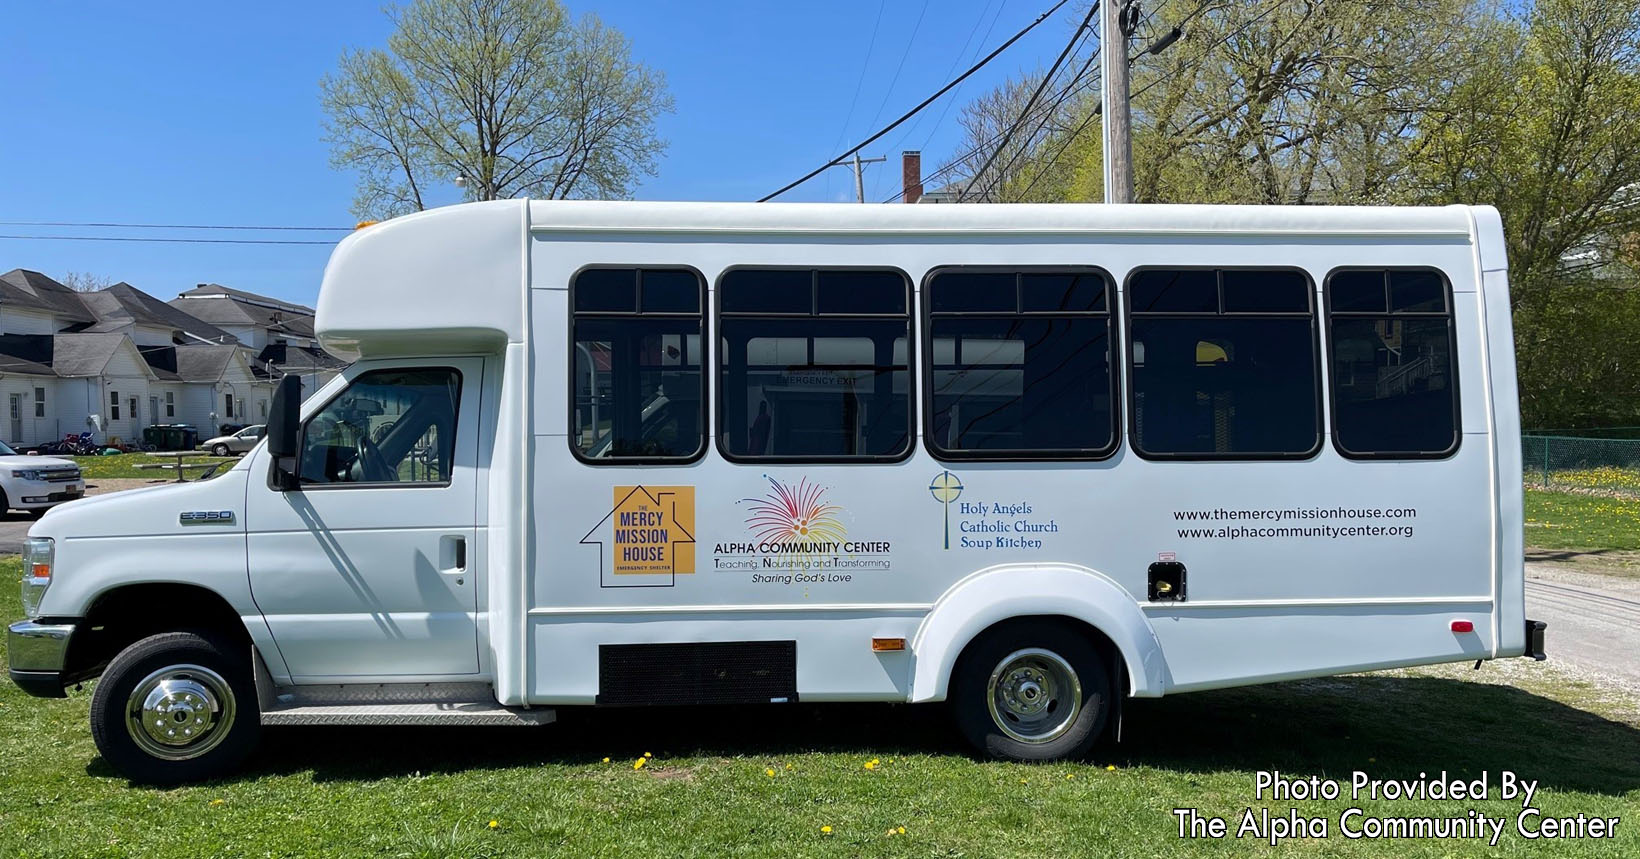 Two shuttles will transport clients to and from meals as well as transport residents of the shelter when available.